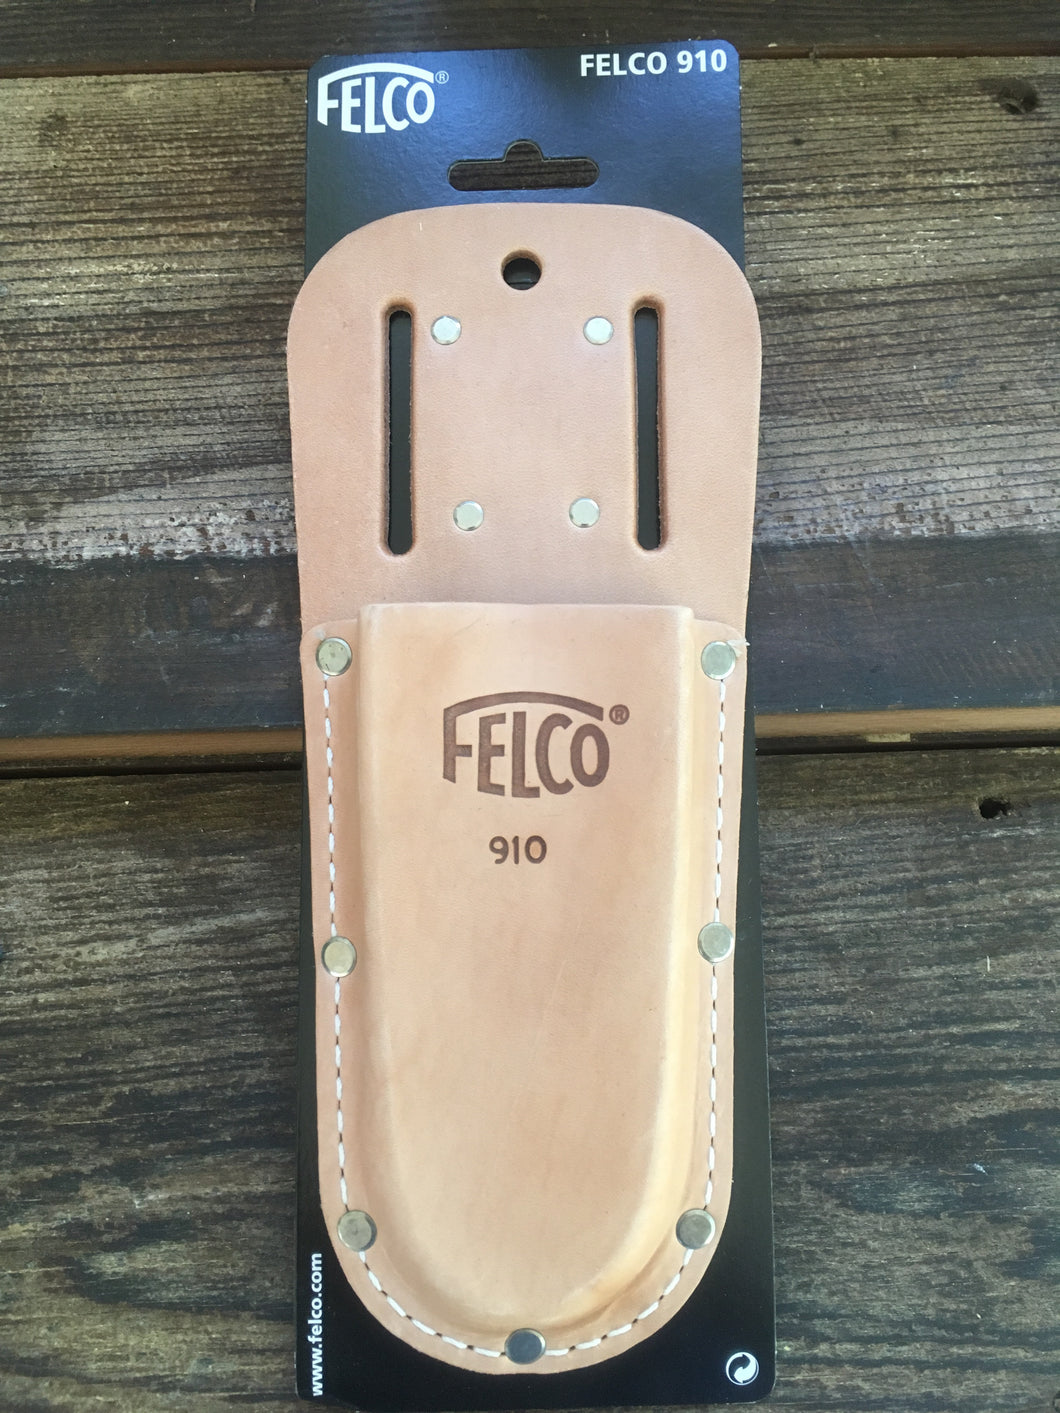 Felco 910 leather holster